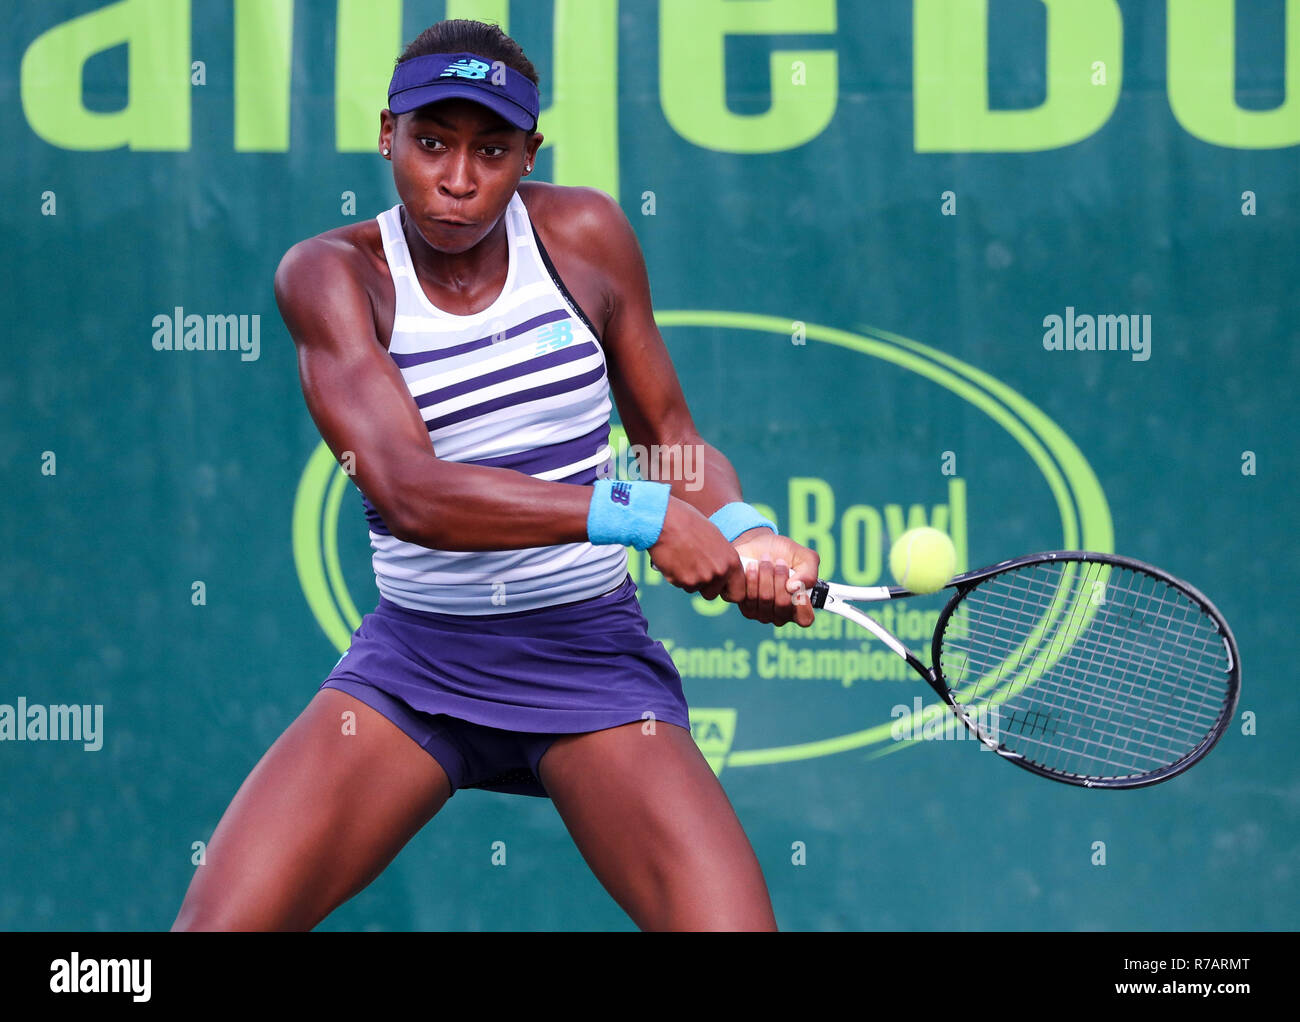 Plantation, Florida, USA. 08th Dec, 2018. Cori Gauff, from the USA, plays in the GS18 ...1300 x 1022